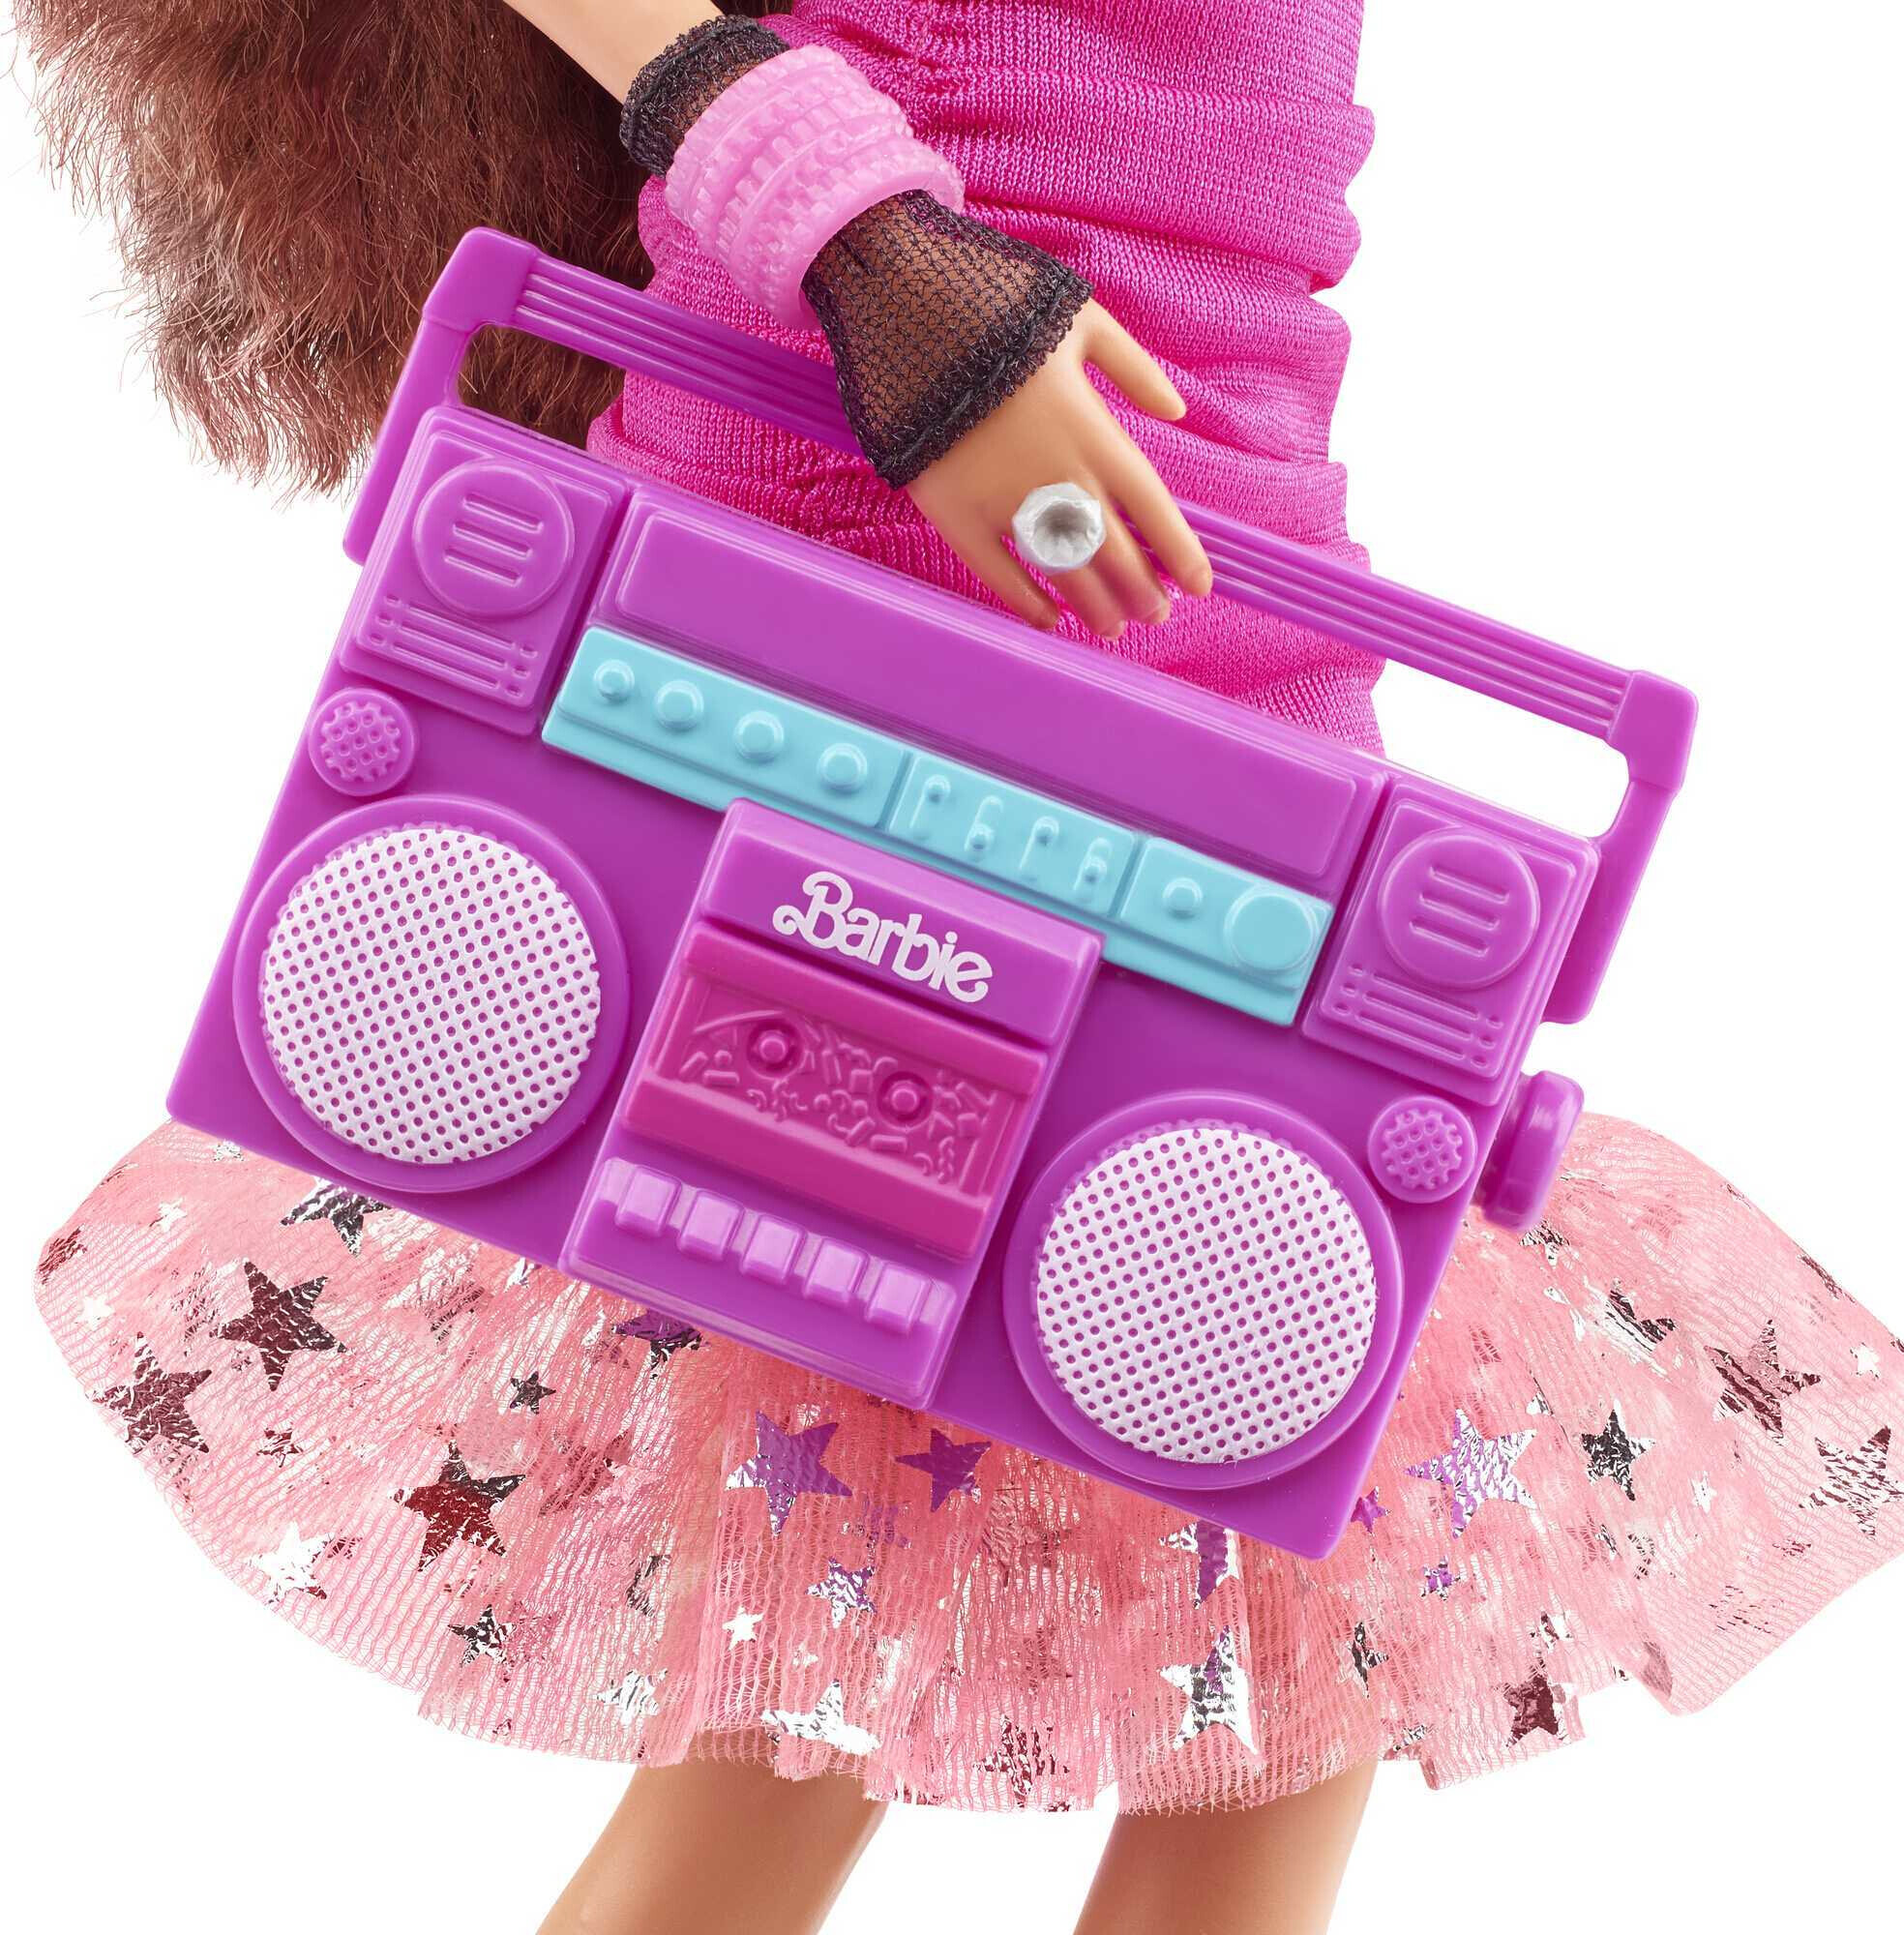 Barbie Rewind '80s Edition Collectible Doll with Night Out Look & Music Accessories - image 5 of 7